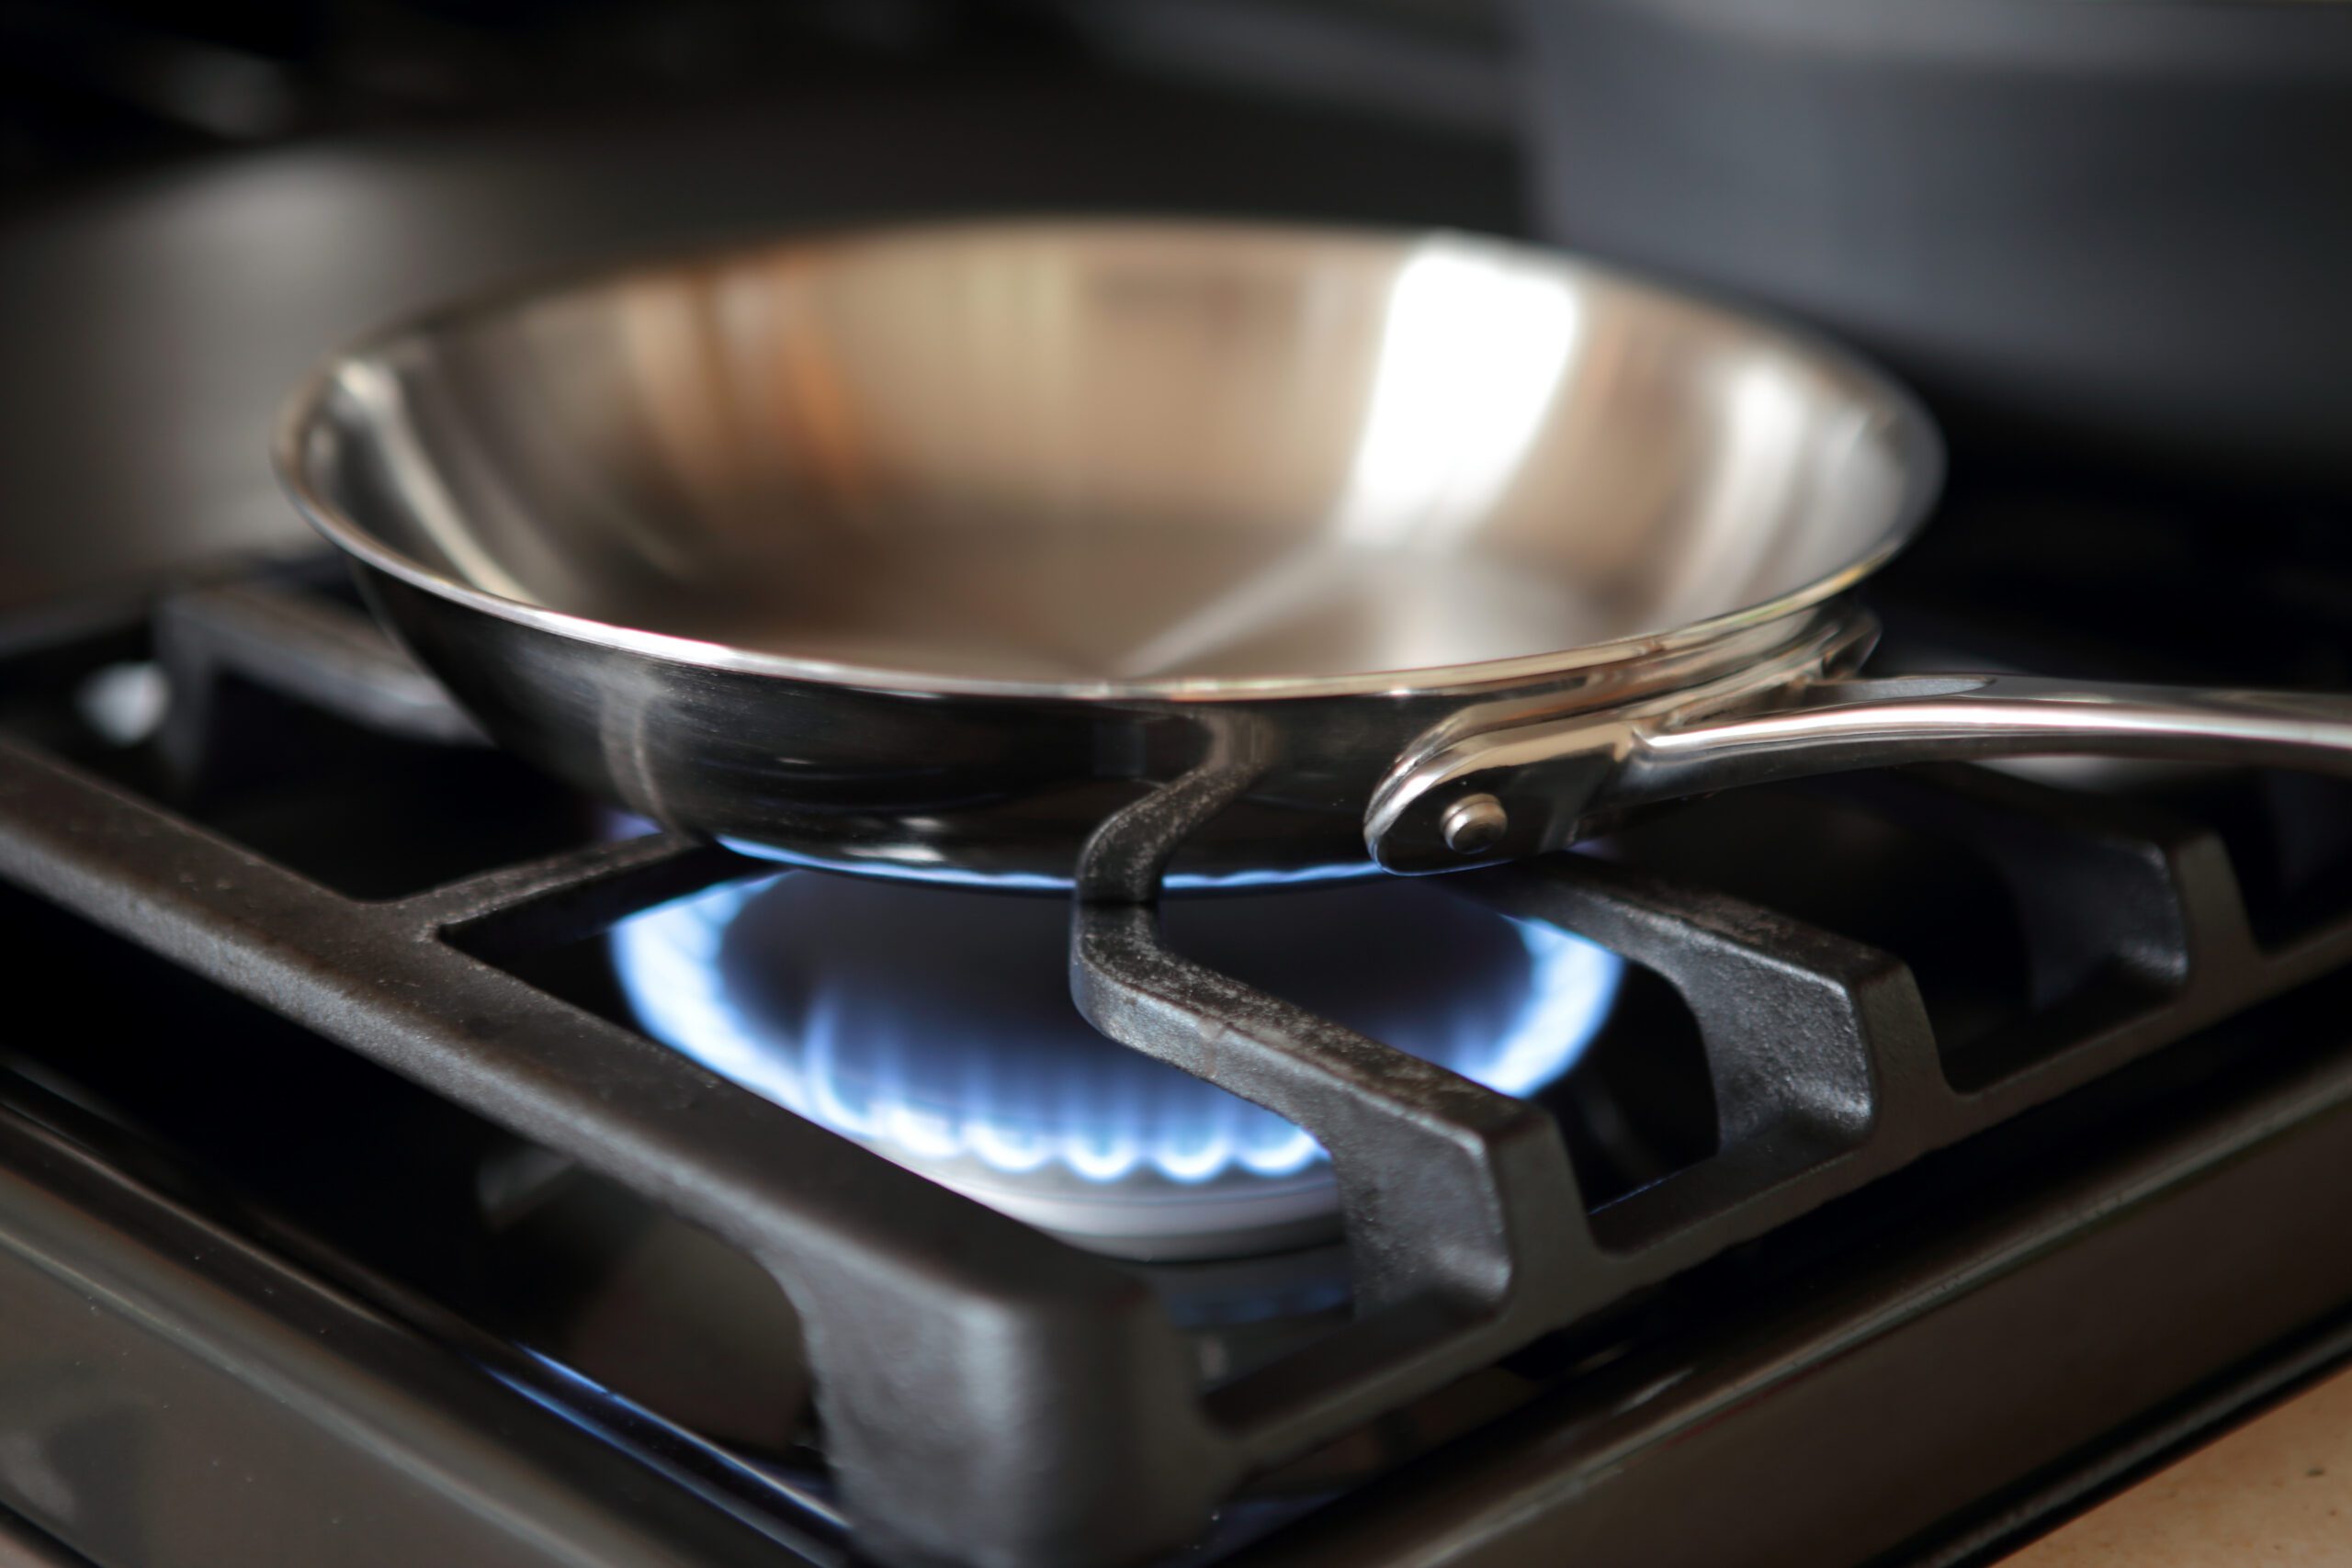 A frying pan sitting on a gas stove top.